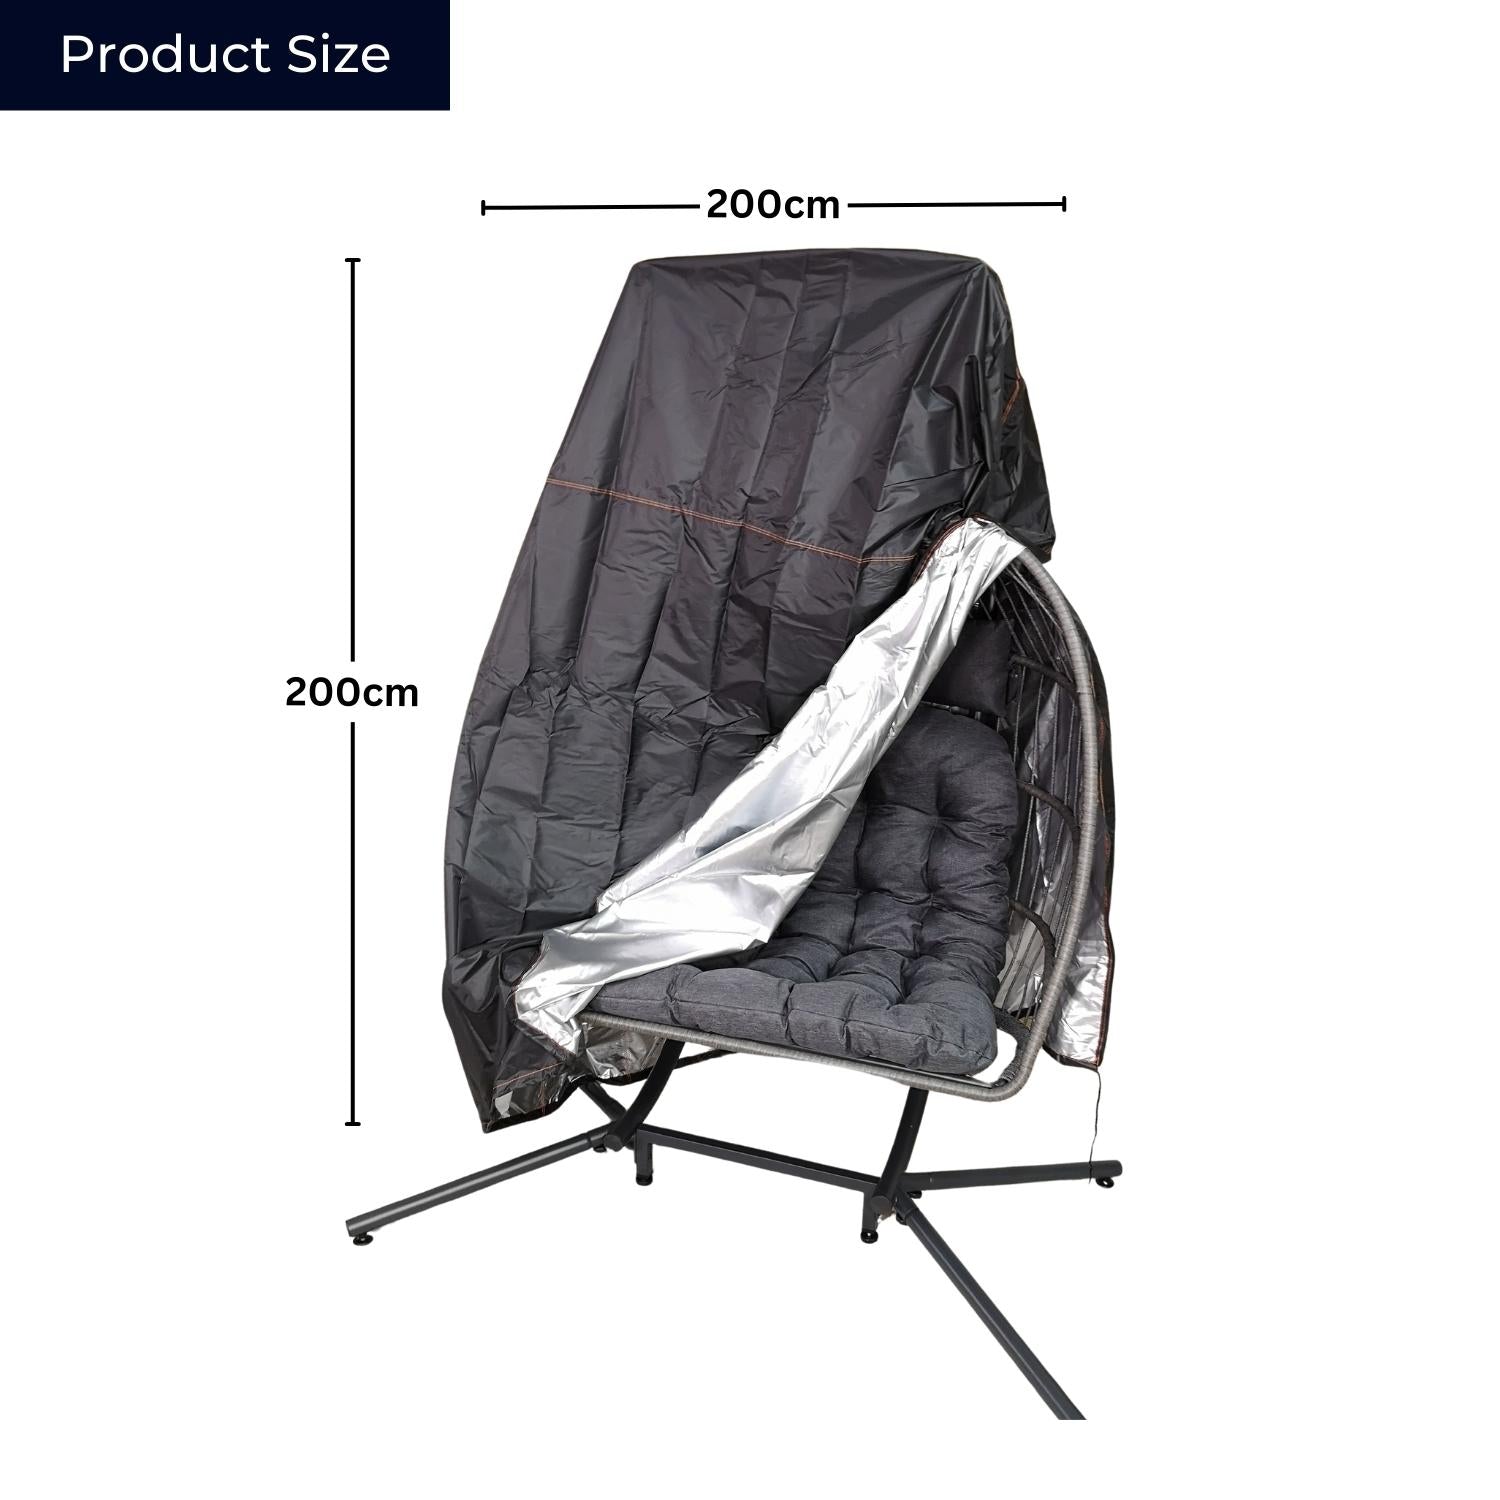 Samuel Alexander Double Egg Garden Chair Covers Waterproof Protective Outdoor Anti UV Windproof Heavy Duty Swing Chair Cover With Zipper for Egg Chair